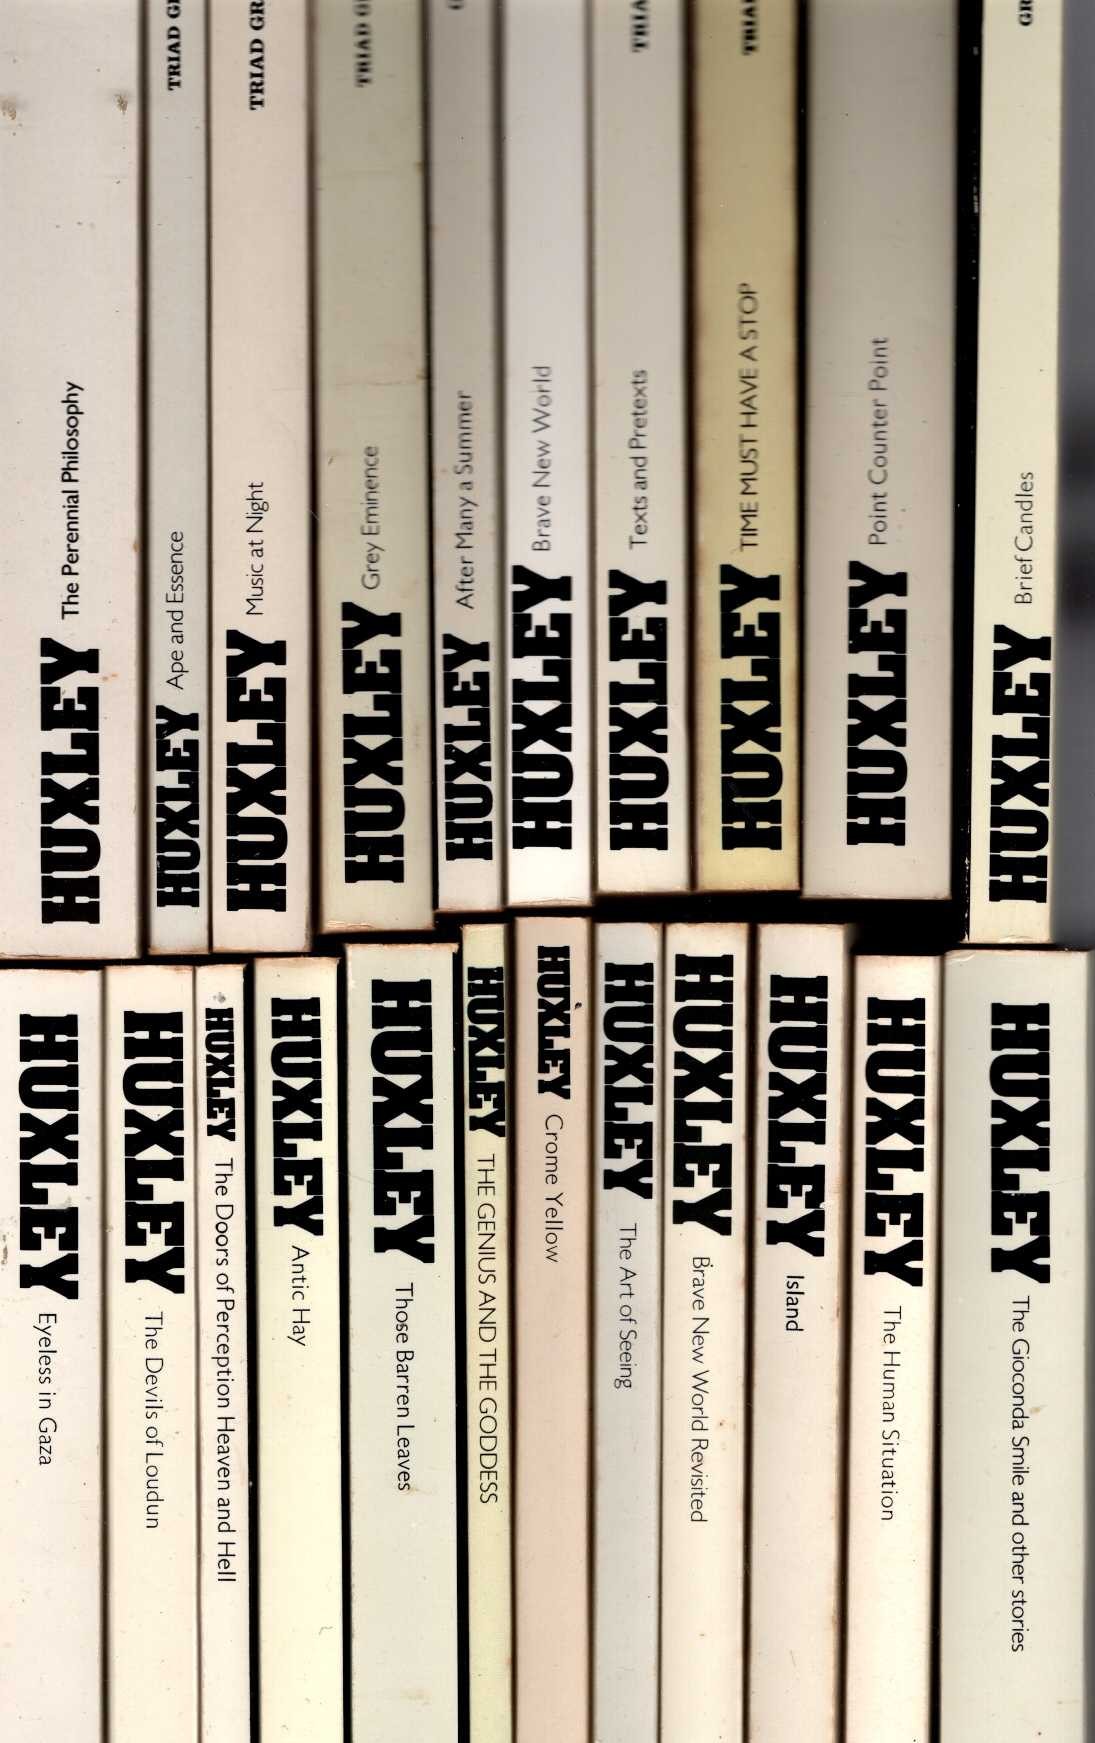 Aldous Huxley  Set of 22 matching books: AFTER MANY A SUMMER/ ANTIC HAY/ APE AND ESSENCE/ BRAVE NEW WORLD/ BRAVE NEW WORLD REVISITED/ BRIEF CANDLES/ CROME YELLOW/ EYELESS IN GAZA/ GREY EMMINENCE/ ISLAND/ MUSIC AT NIGHT/ POINT COUNTER POINT/ TEXTS & PRETEXTS/ THE ART OF SEEING/ THE DEVILS OF LOUDUN/ THE DOORS OF PERCEPTION and HEAVEN AND HELL/ THE GENIUS AND THE GODDESS/ THE GIOCONDA SMILE and other stories/ THE HUMAN SITUATION/ THE PERENNIAL PHILOSOPHY/ THOSE BARREN LEAVES/ TIME MUST HAVE A STOP front book cover image